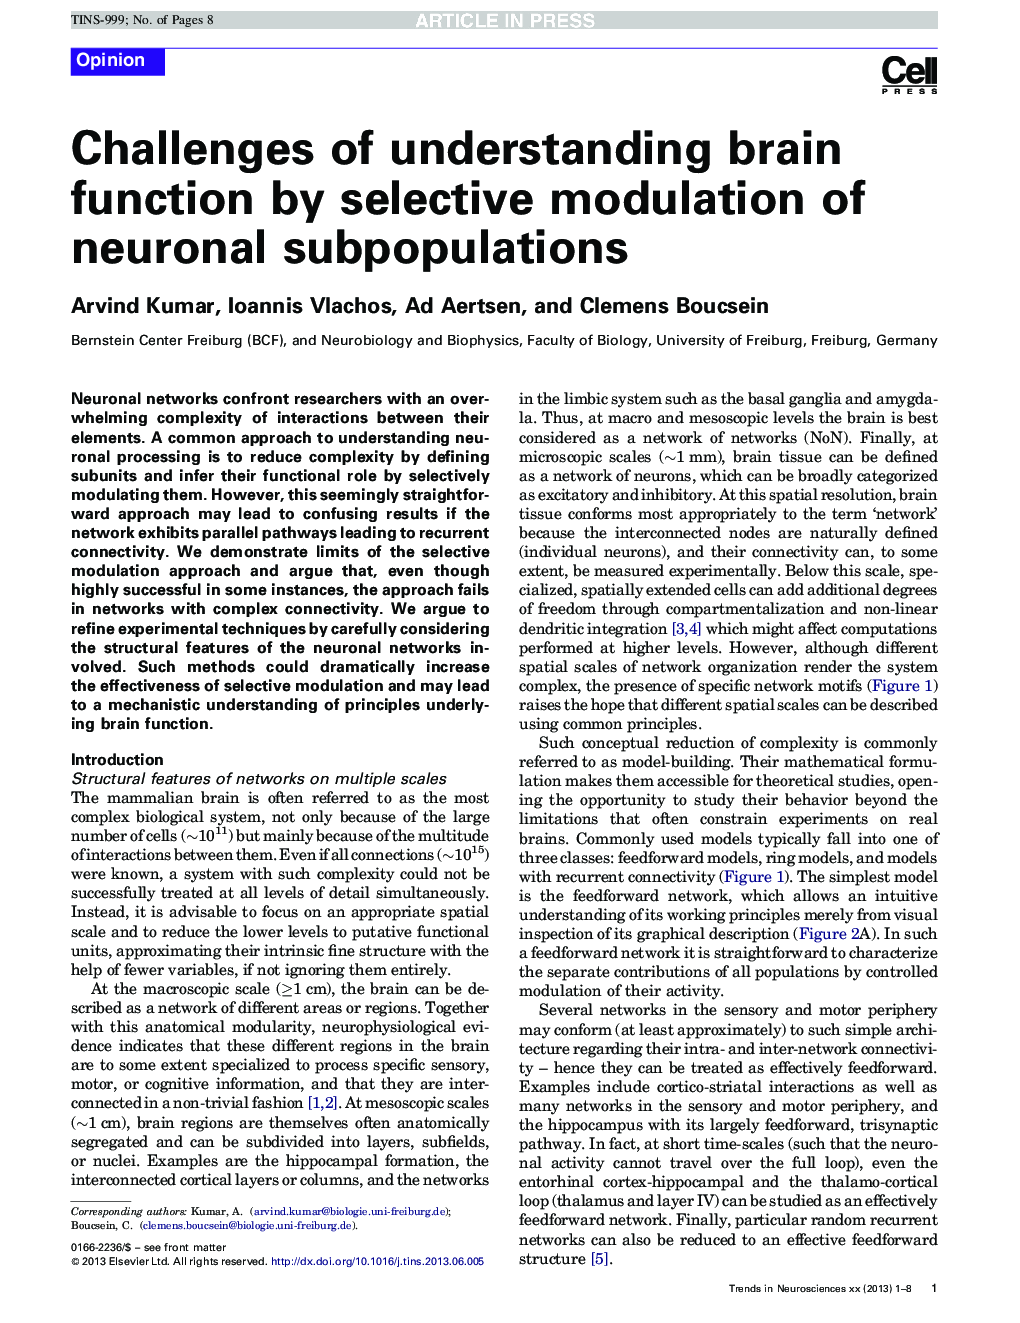 Challenges of understanding brain function by selective modulation of neuronal subpopulations